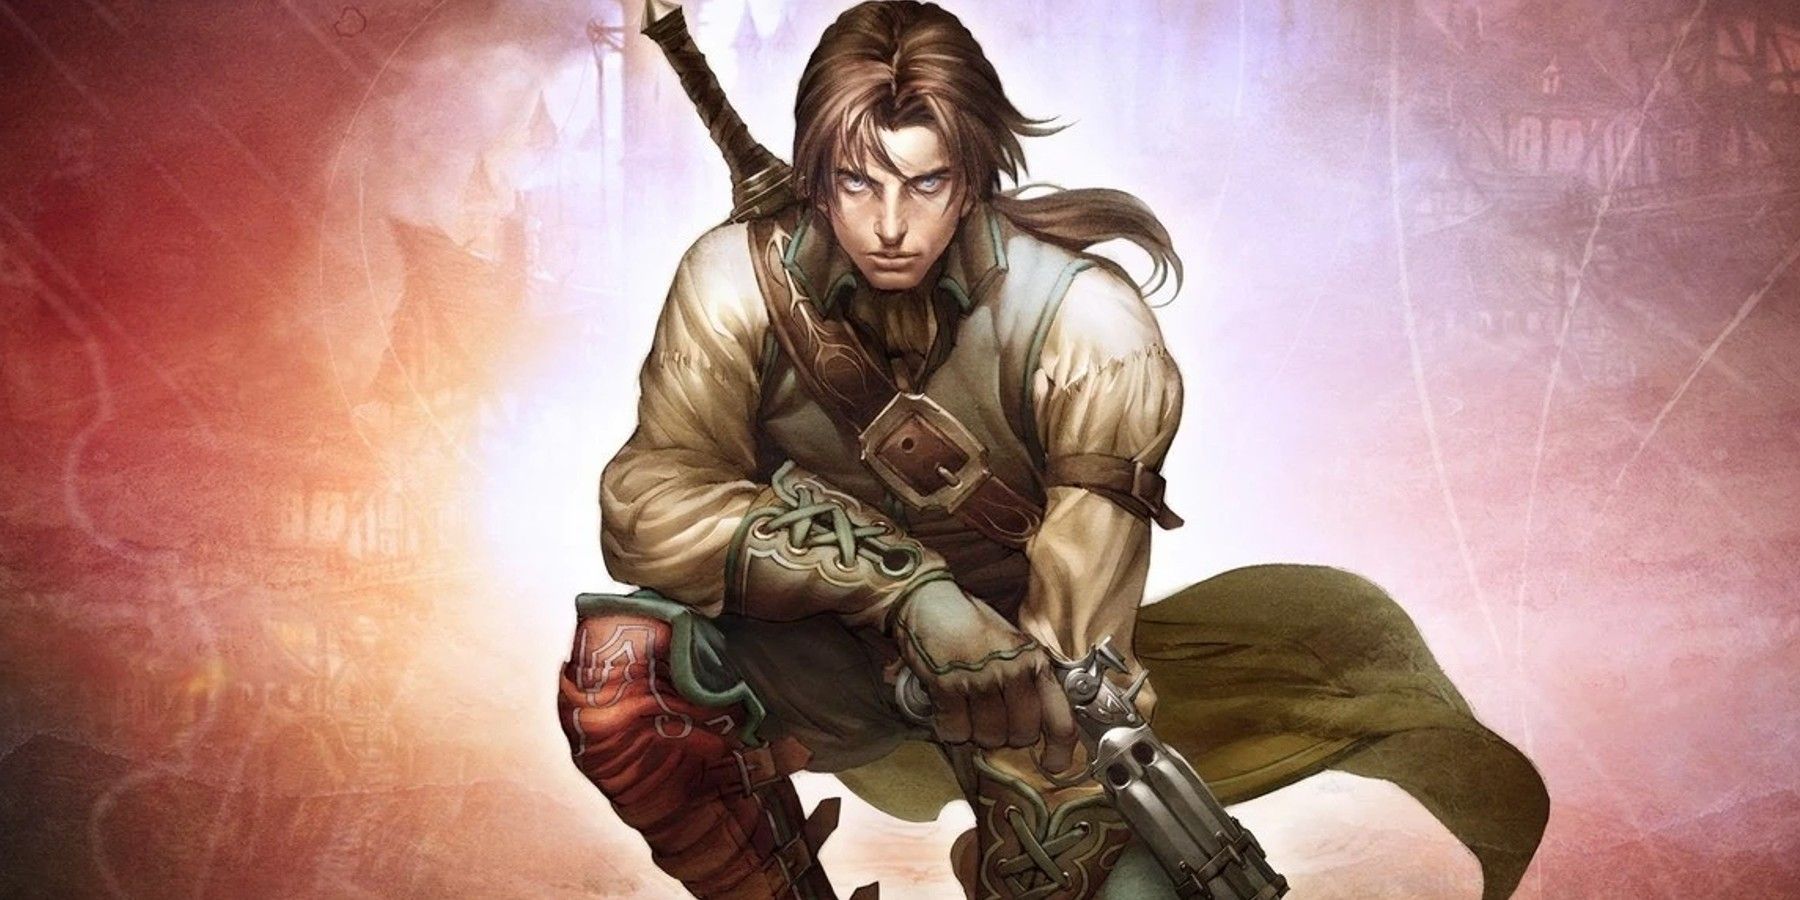 Fable 2 Cover